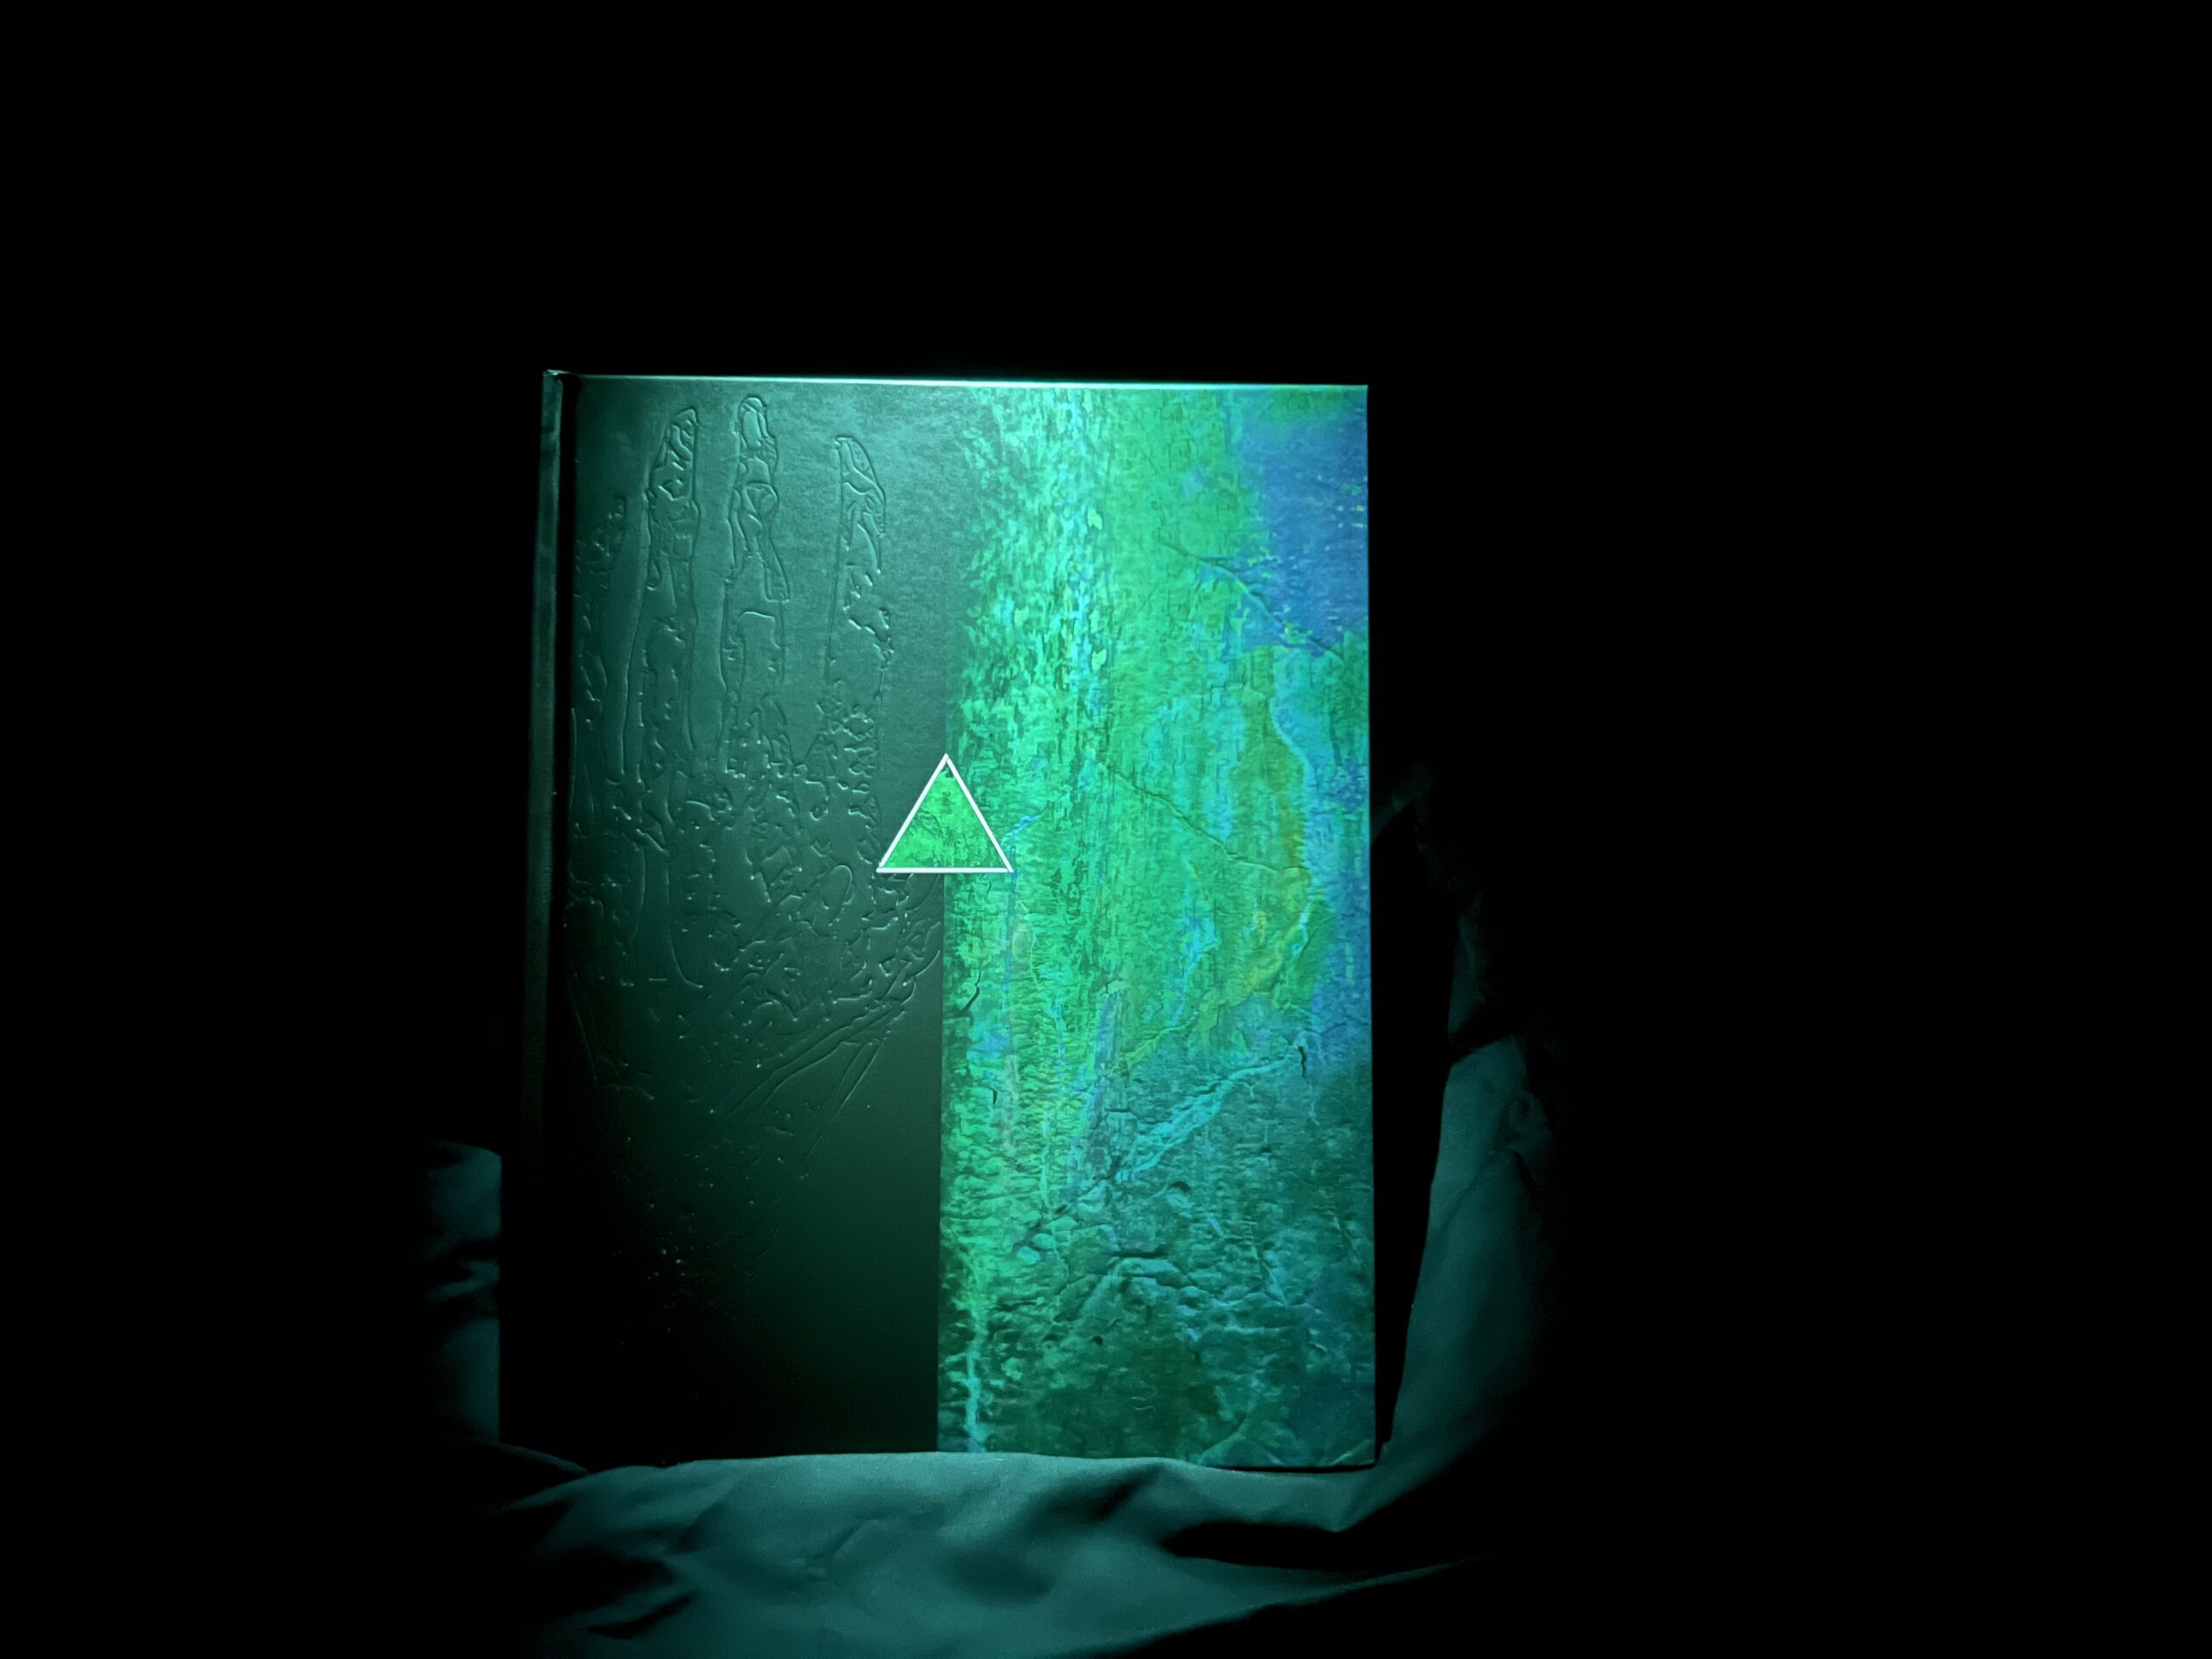 a black and green copy of Delta Green: The Conspiracy sits in the darkness illuminated only by a green spotlight from above. Strange, alien symbols are pressed into the cover.